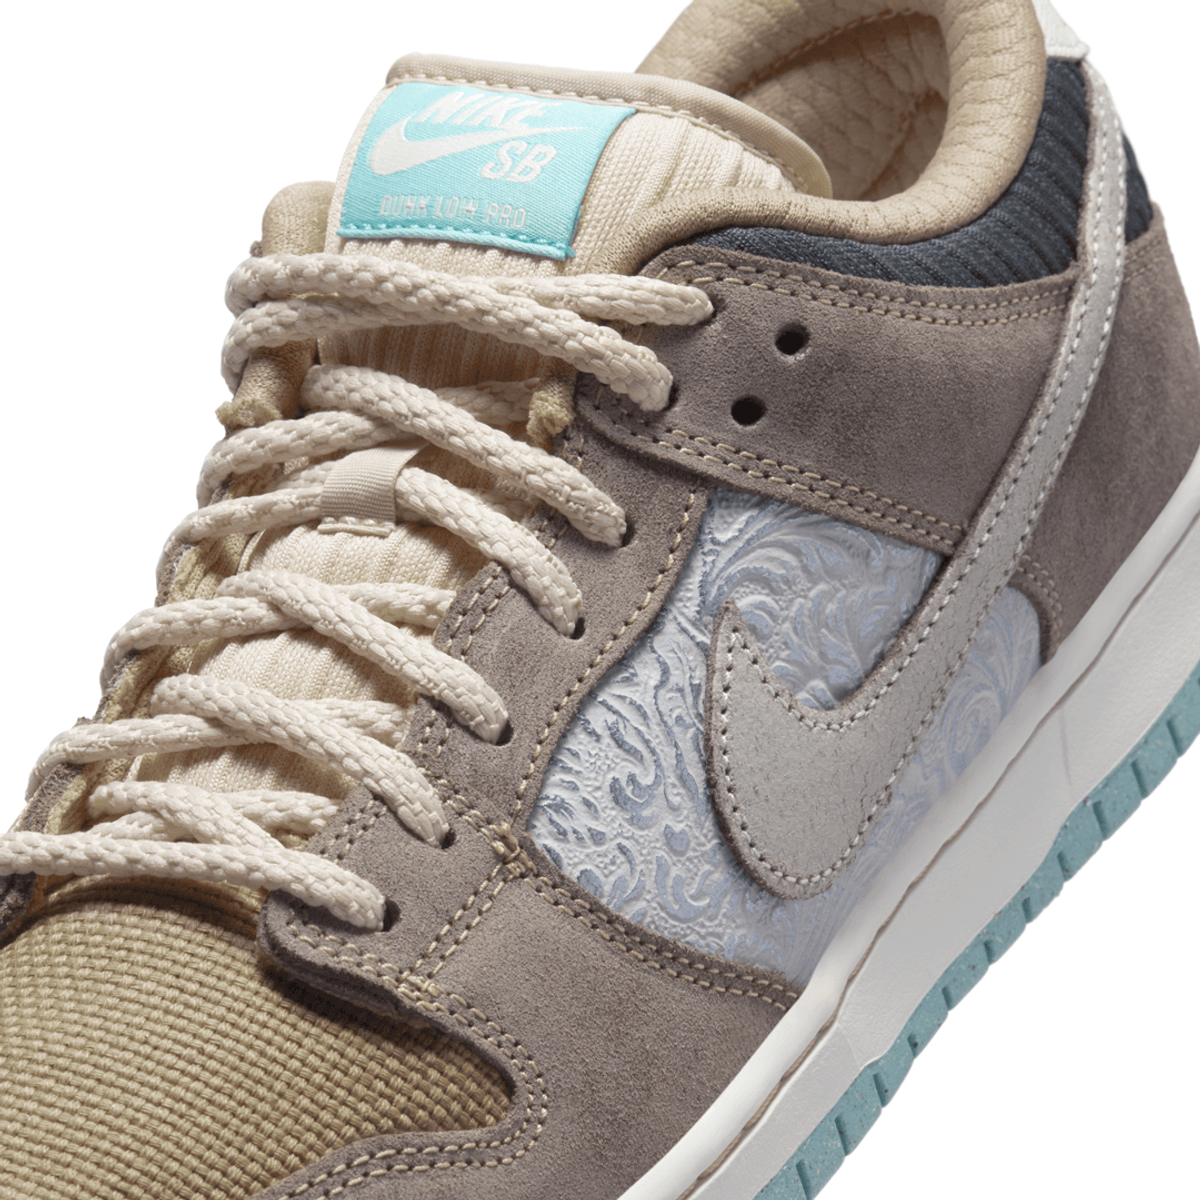 First Look At The Nike SB Dunk Low “Big Money Savings”